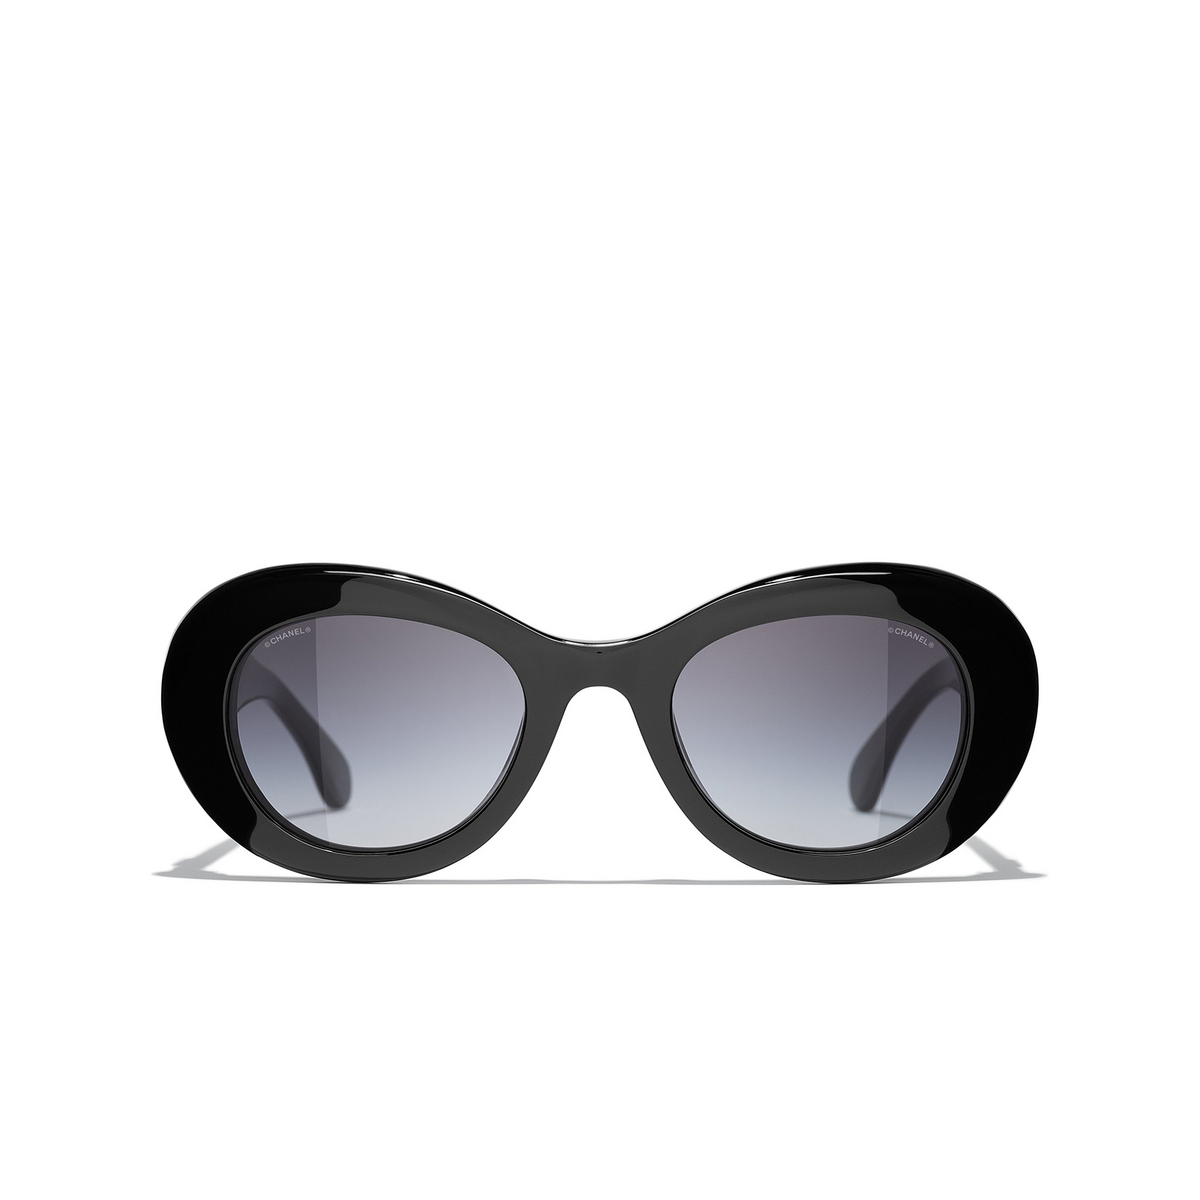 CHANEL oval Sunglasses C888S6 Black - front view